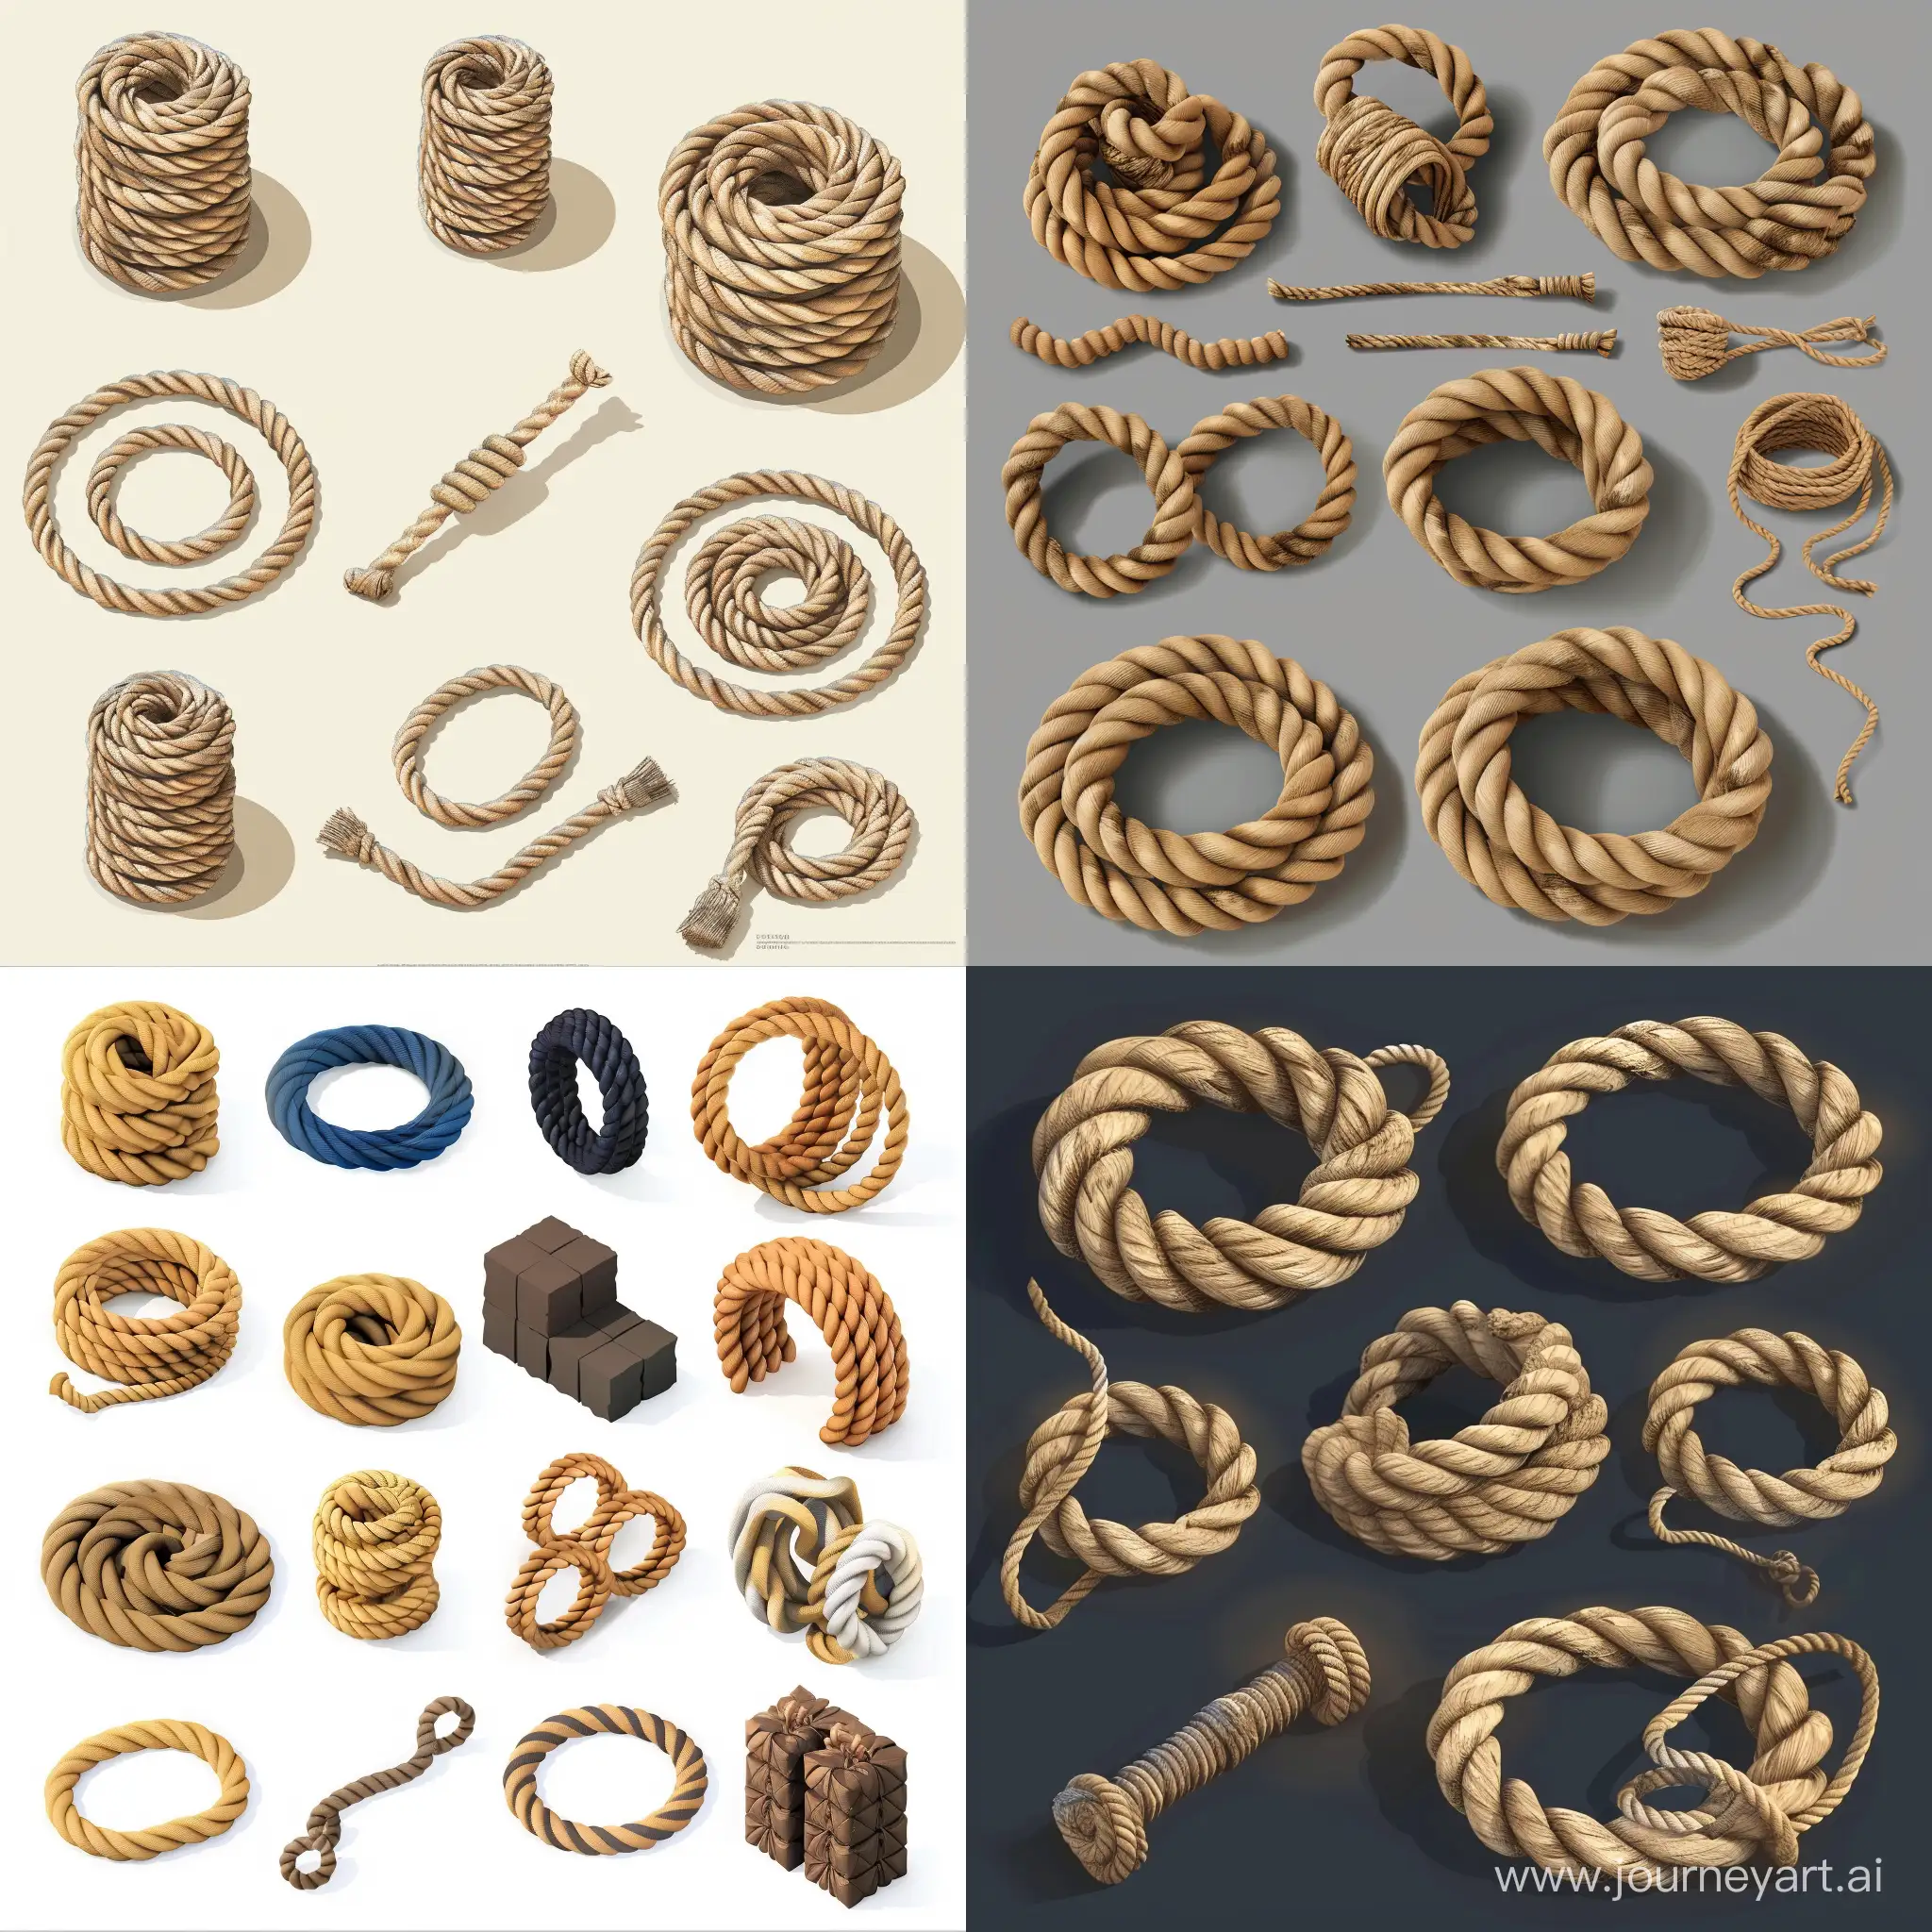 Realistic-Coiled-Synthetic-Rope-Set-in-Isometric-View